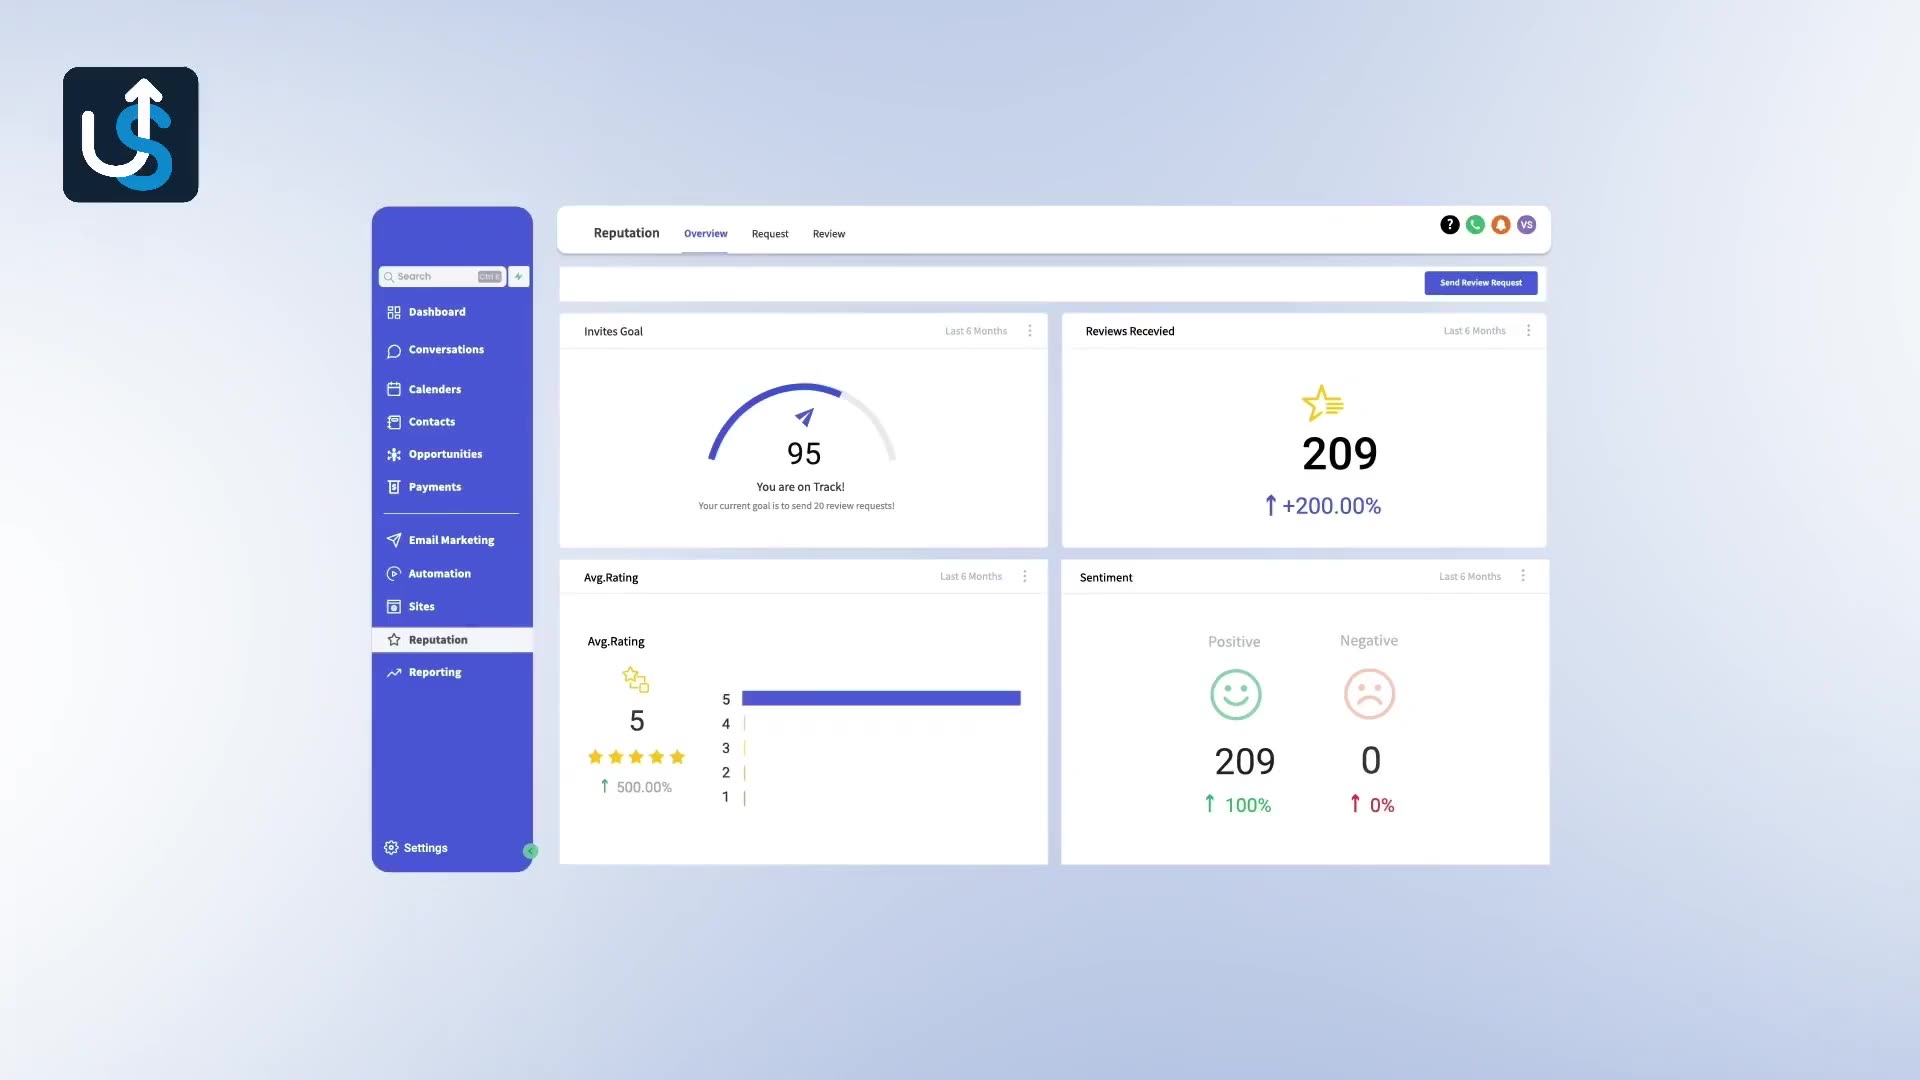 A dashboard overview showing reputation metrics, including a 95 Rating Trend, 209 Online Reviews with a 1,200% increase, and sentiment analysis (209 Positive, 1 Neutral, 0 Negative).